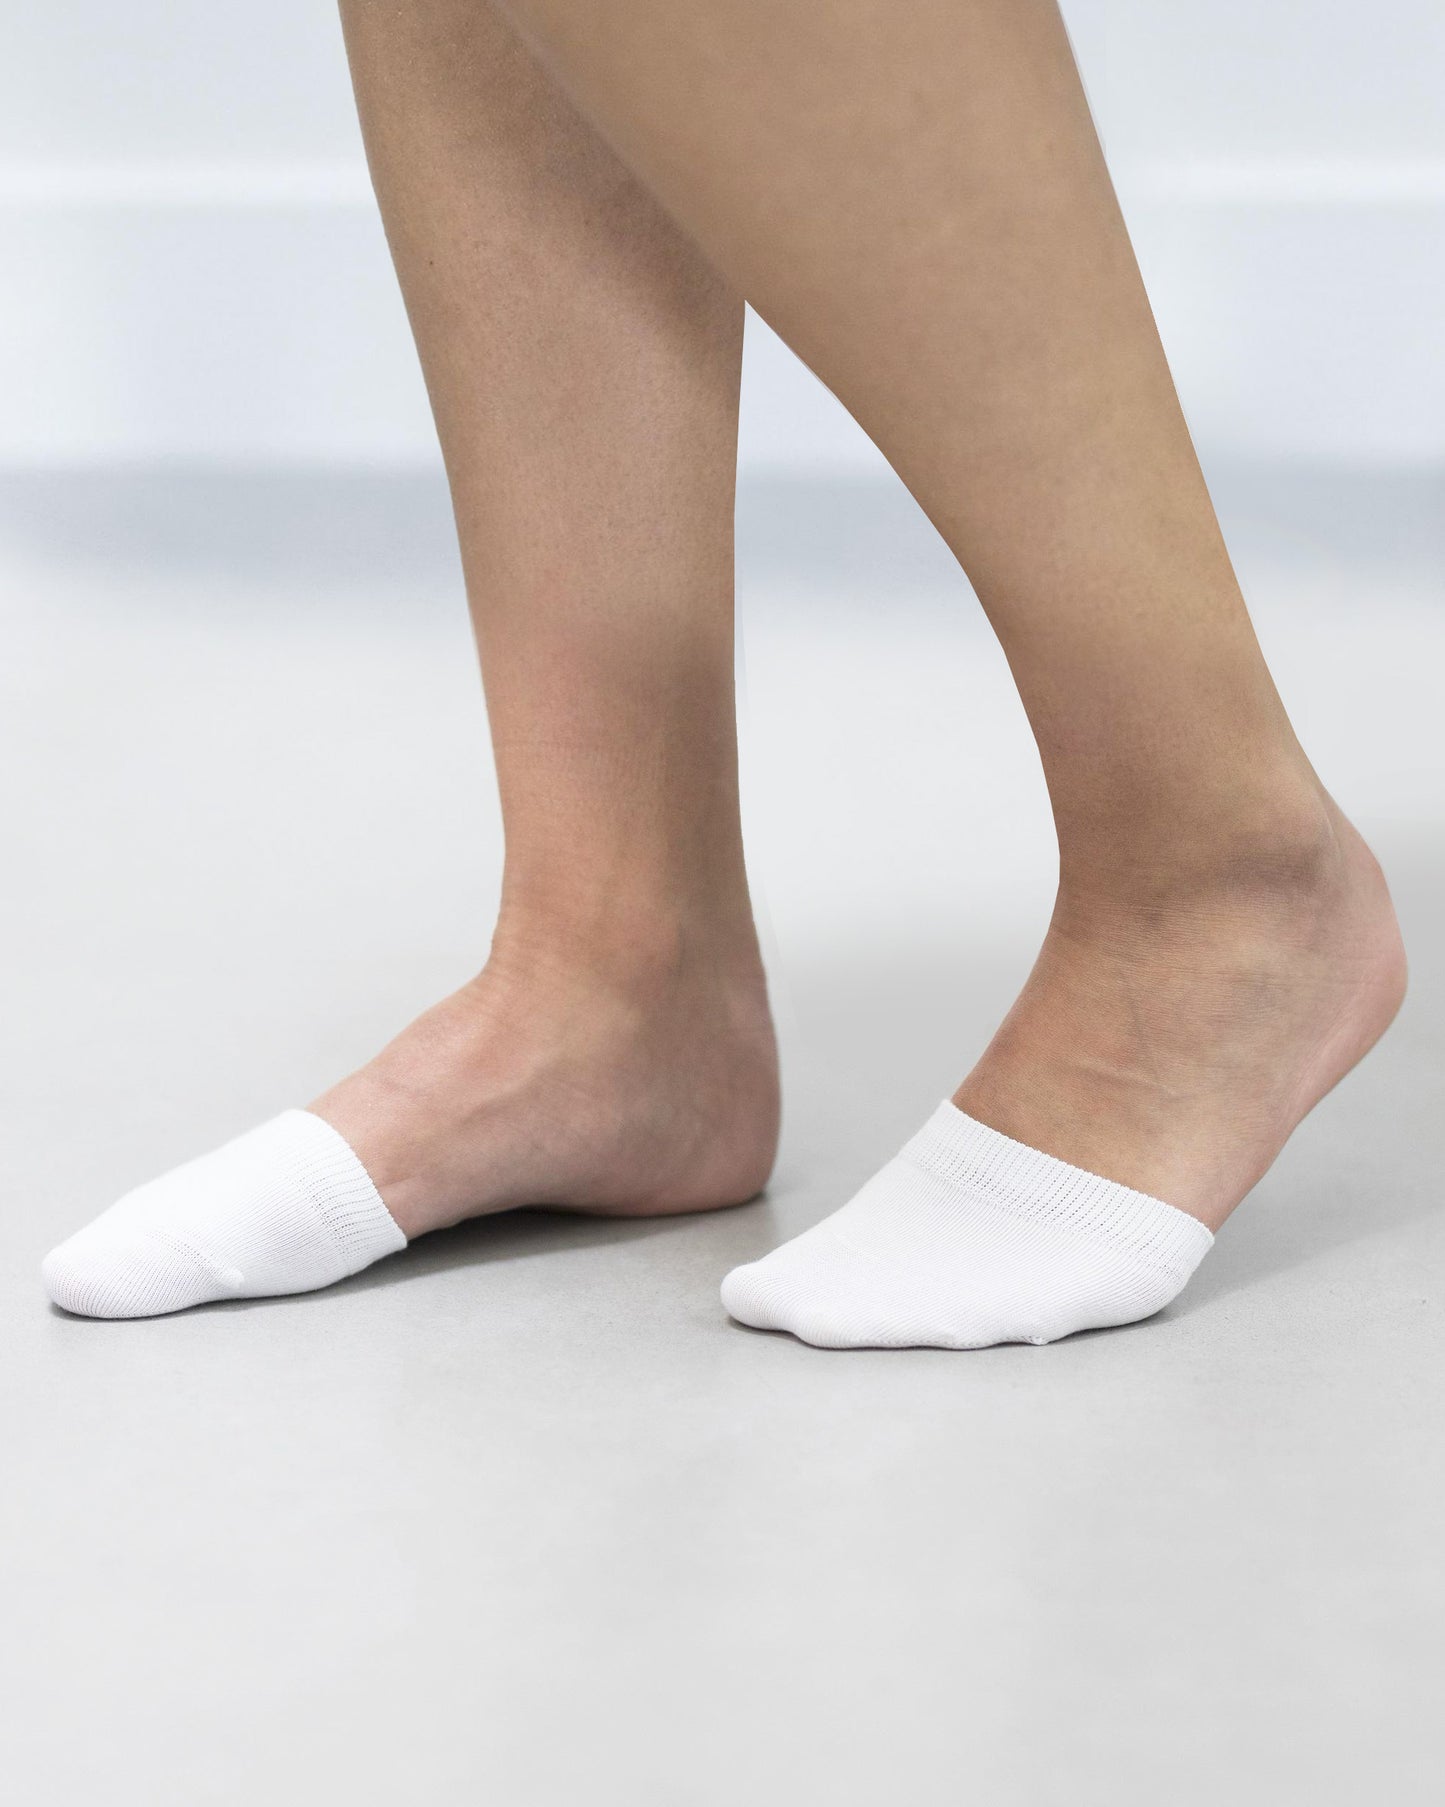 Bonnie Doon Toe Cover BE311000 - White cotton toe sock perfect for wearing with mules or sling back shoes